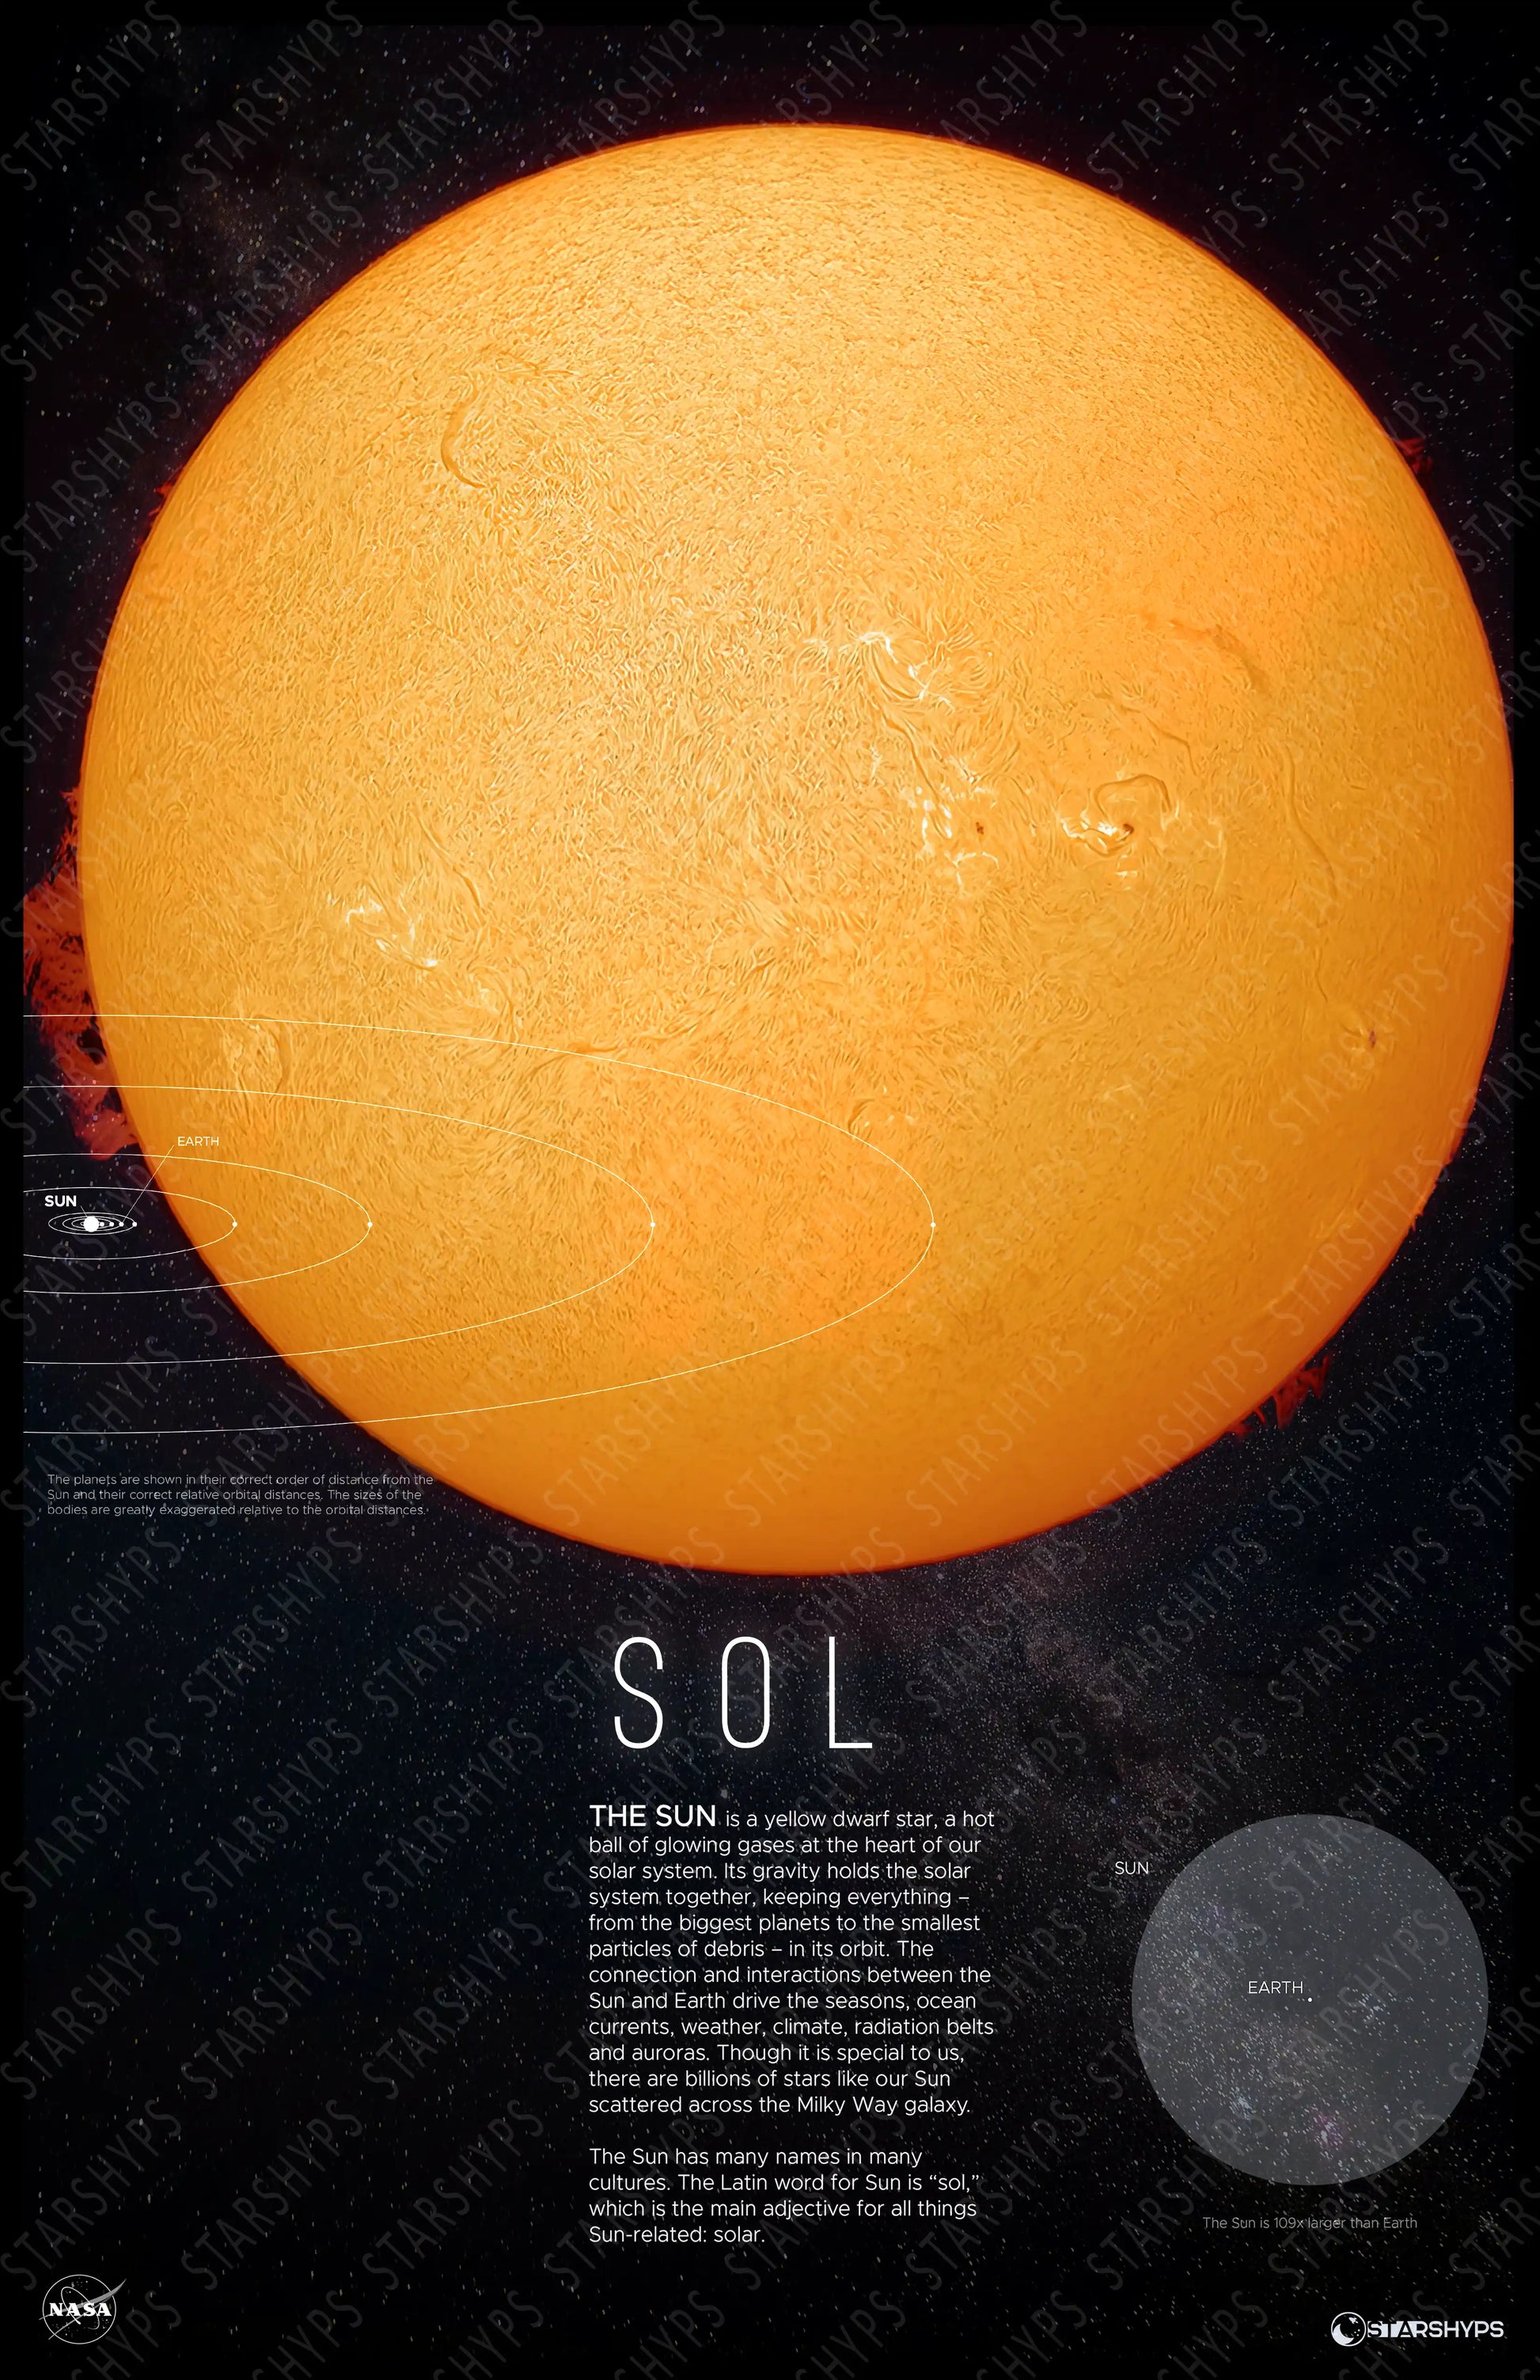 Solar Radiance Decor | Sun Center Print | Rocket Blueprint Posters | The image features a poster of the Sun titled "SOL." The Sun, depicted in bright yellow-orange, dominates the poster. Descriptive text about the Sun is included below, along with a diagram illustrating the Sun's position in the solar system and its size relative to Earth.